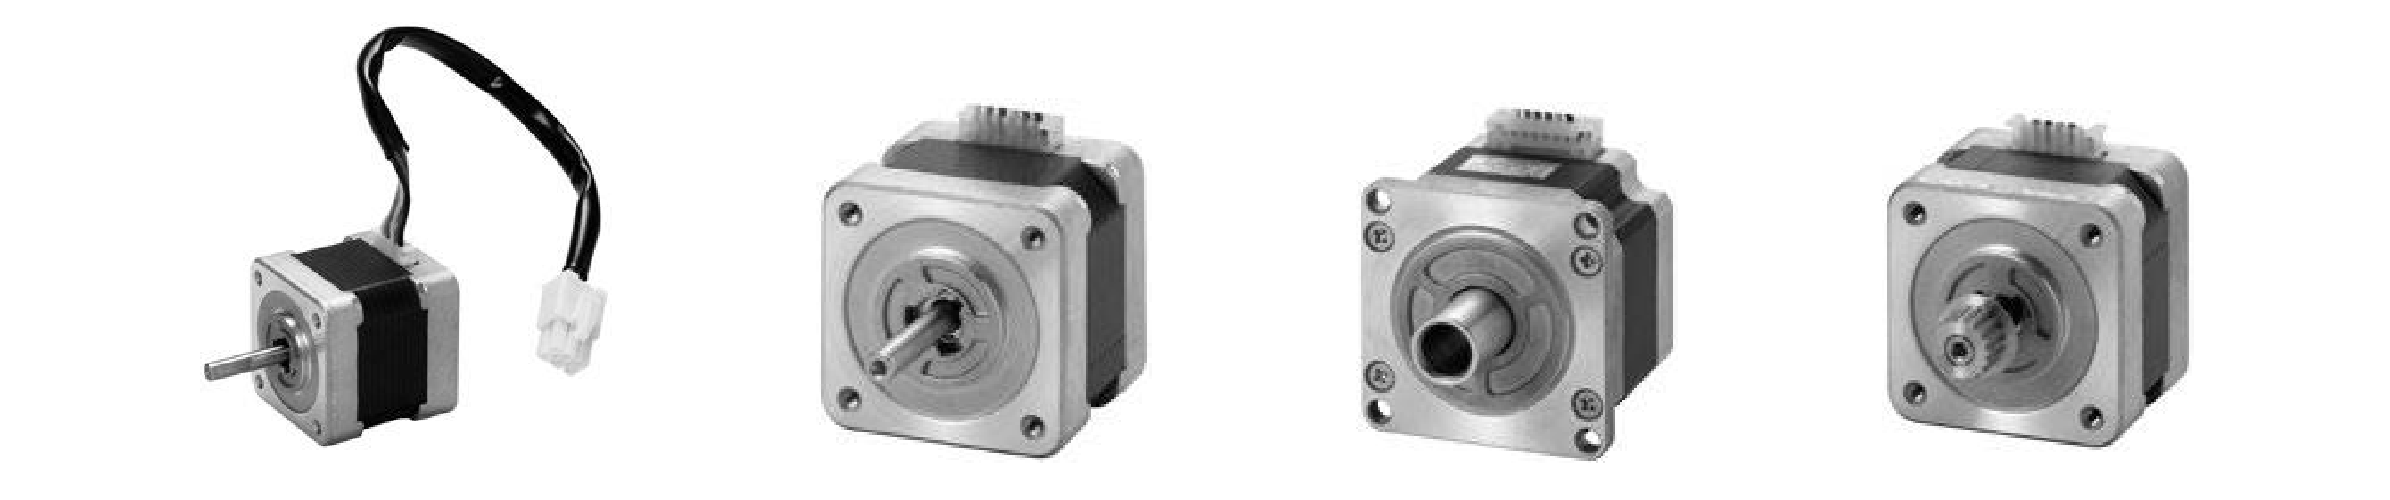 Stepper Motors with Shafts and Cable Modifications